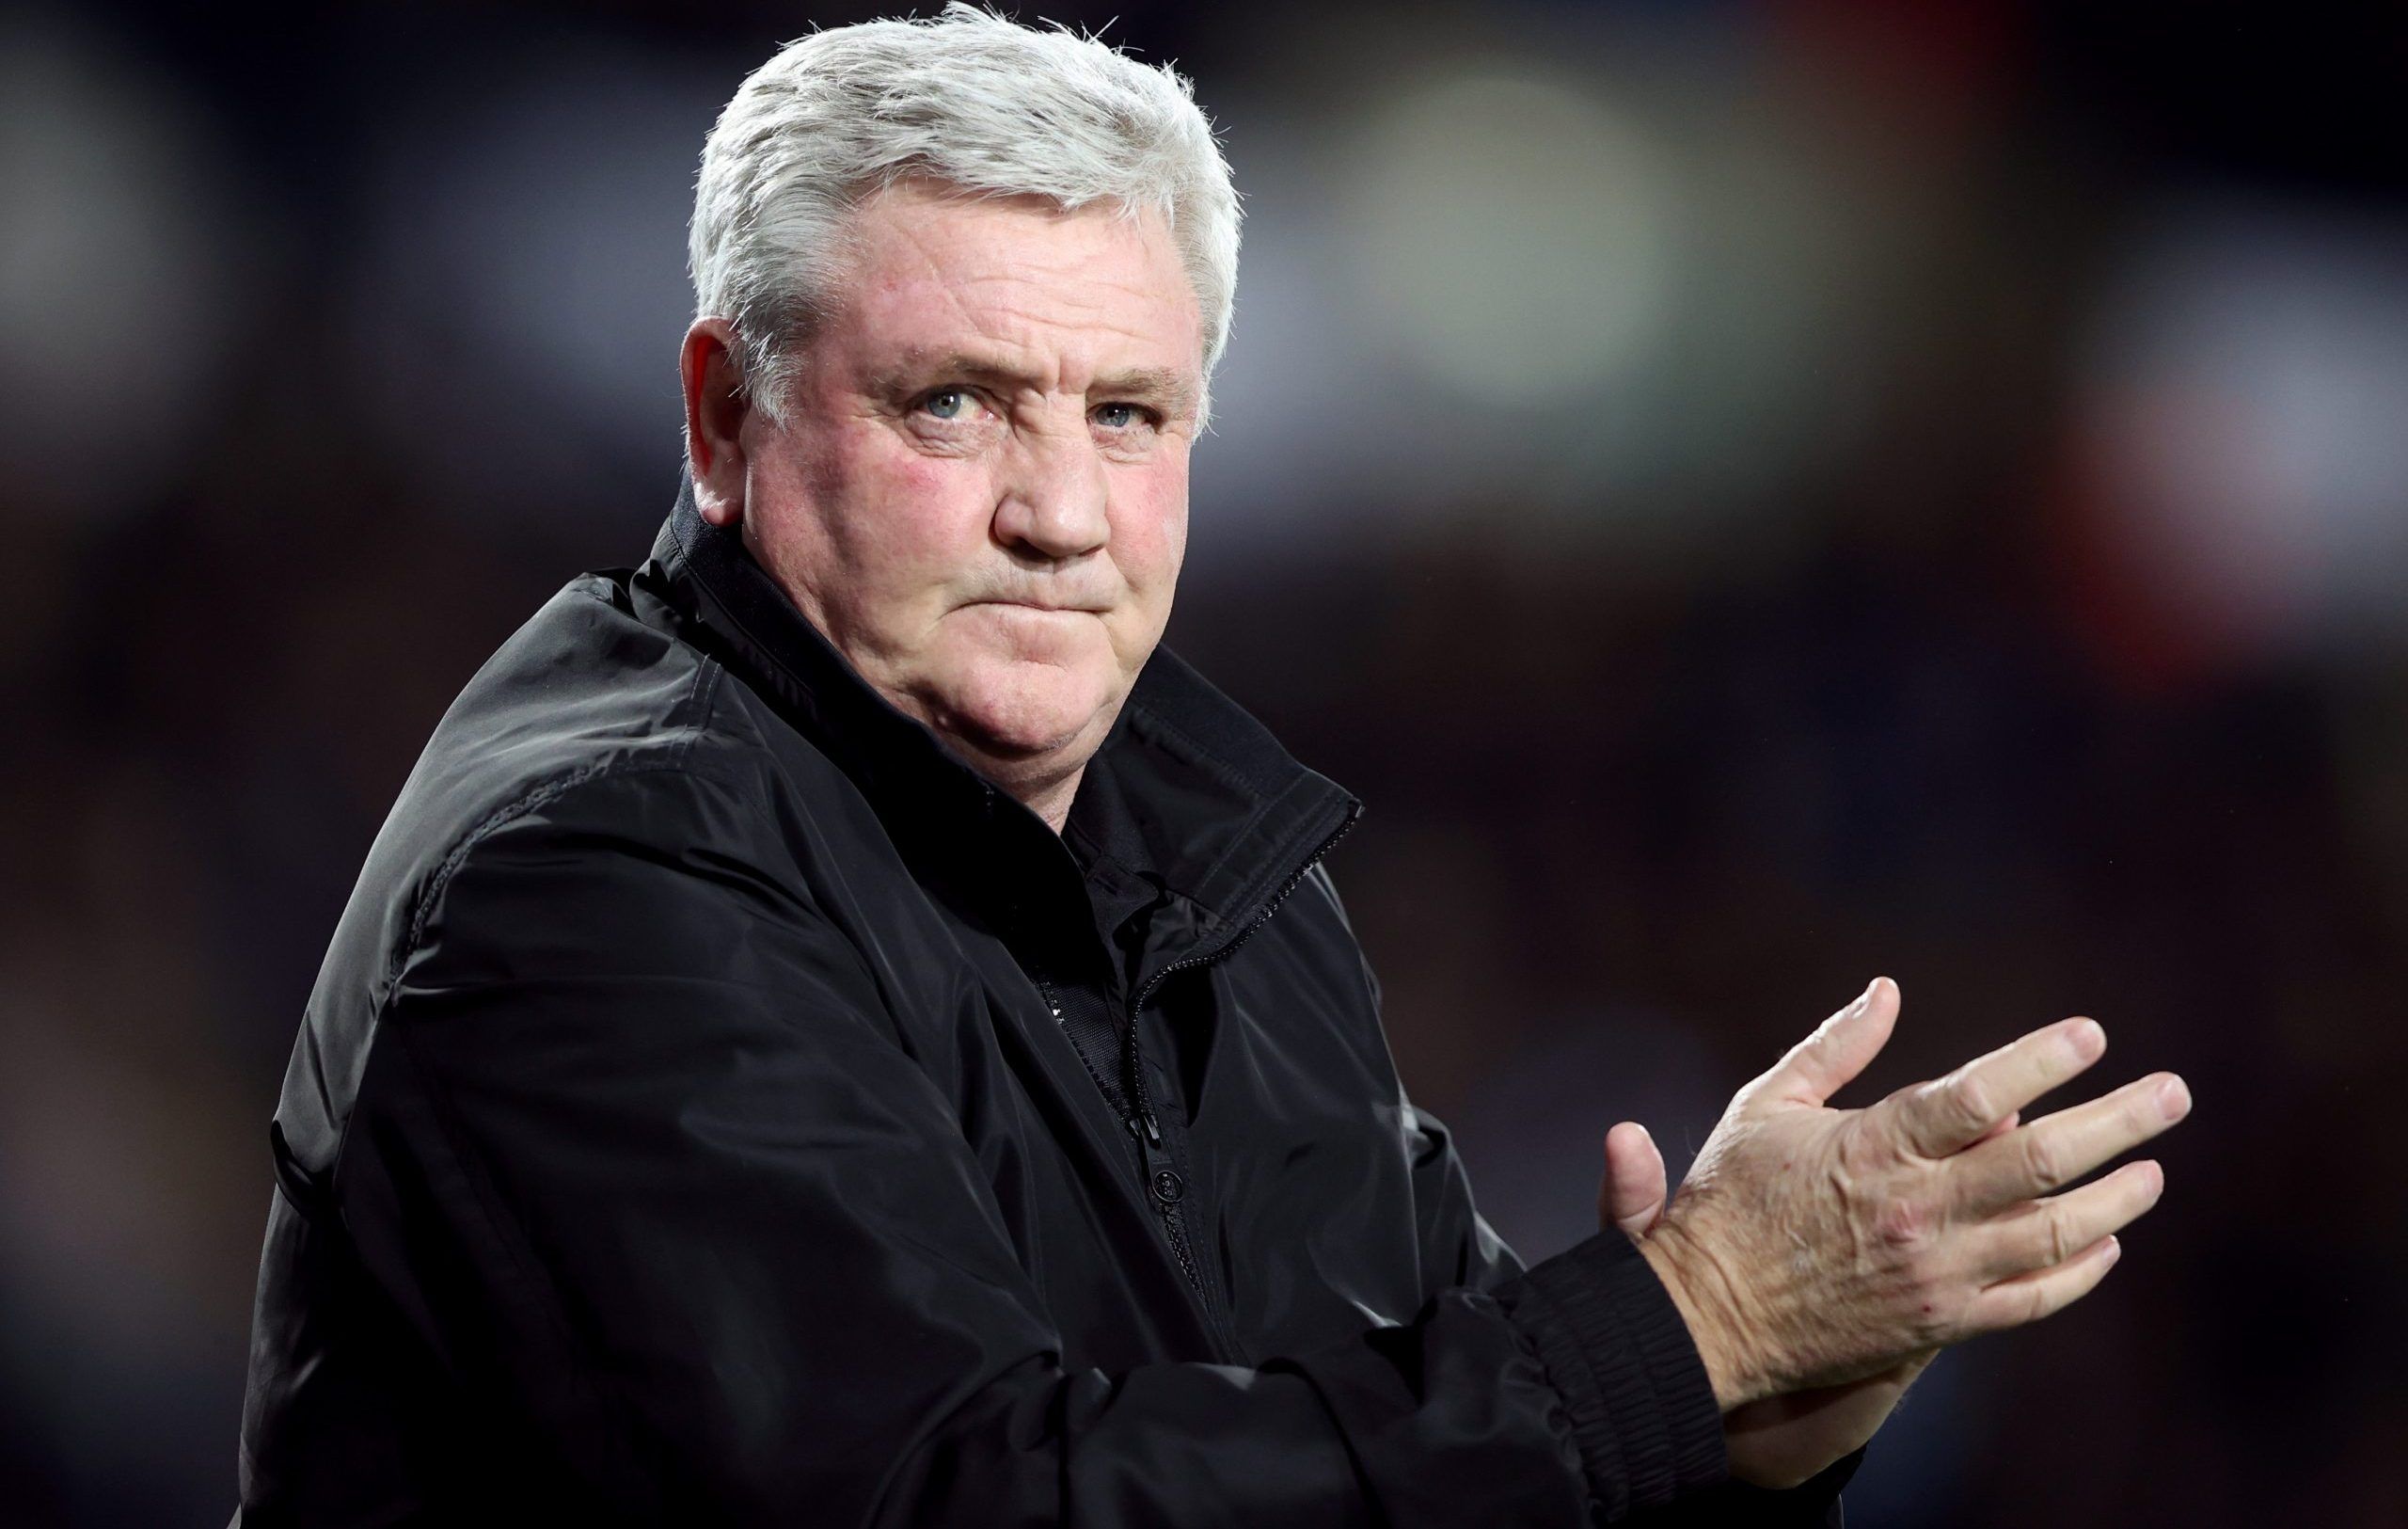 West Bromwich Albion manager Steve Bruce Soccer Football - Championship - West Bromwich Albion v Blackburn Rovers - The Hawthorns, West Bromwich, Britain - February 14, 2022 West Bromwich Albion manager Steve Bruce Action Images/Molly Darlington EDITORIAL USE ONLY. No use with unauthorized audio, video, data, fixture lists, club/league logos or 'live' services. Online in-match use limited to 75 images, no video emulation. No use in betting, games or single club /league/player publications.  Plea